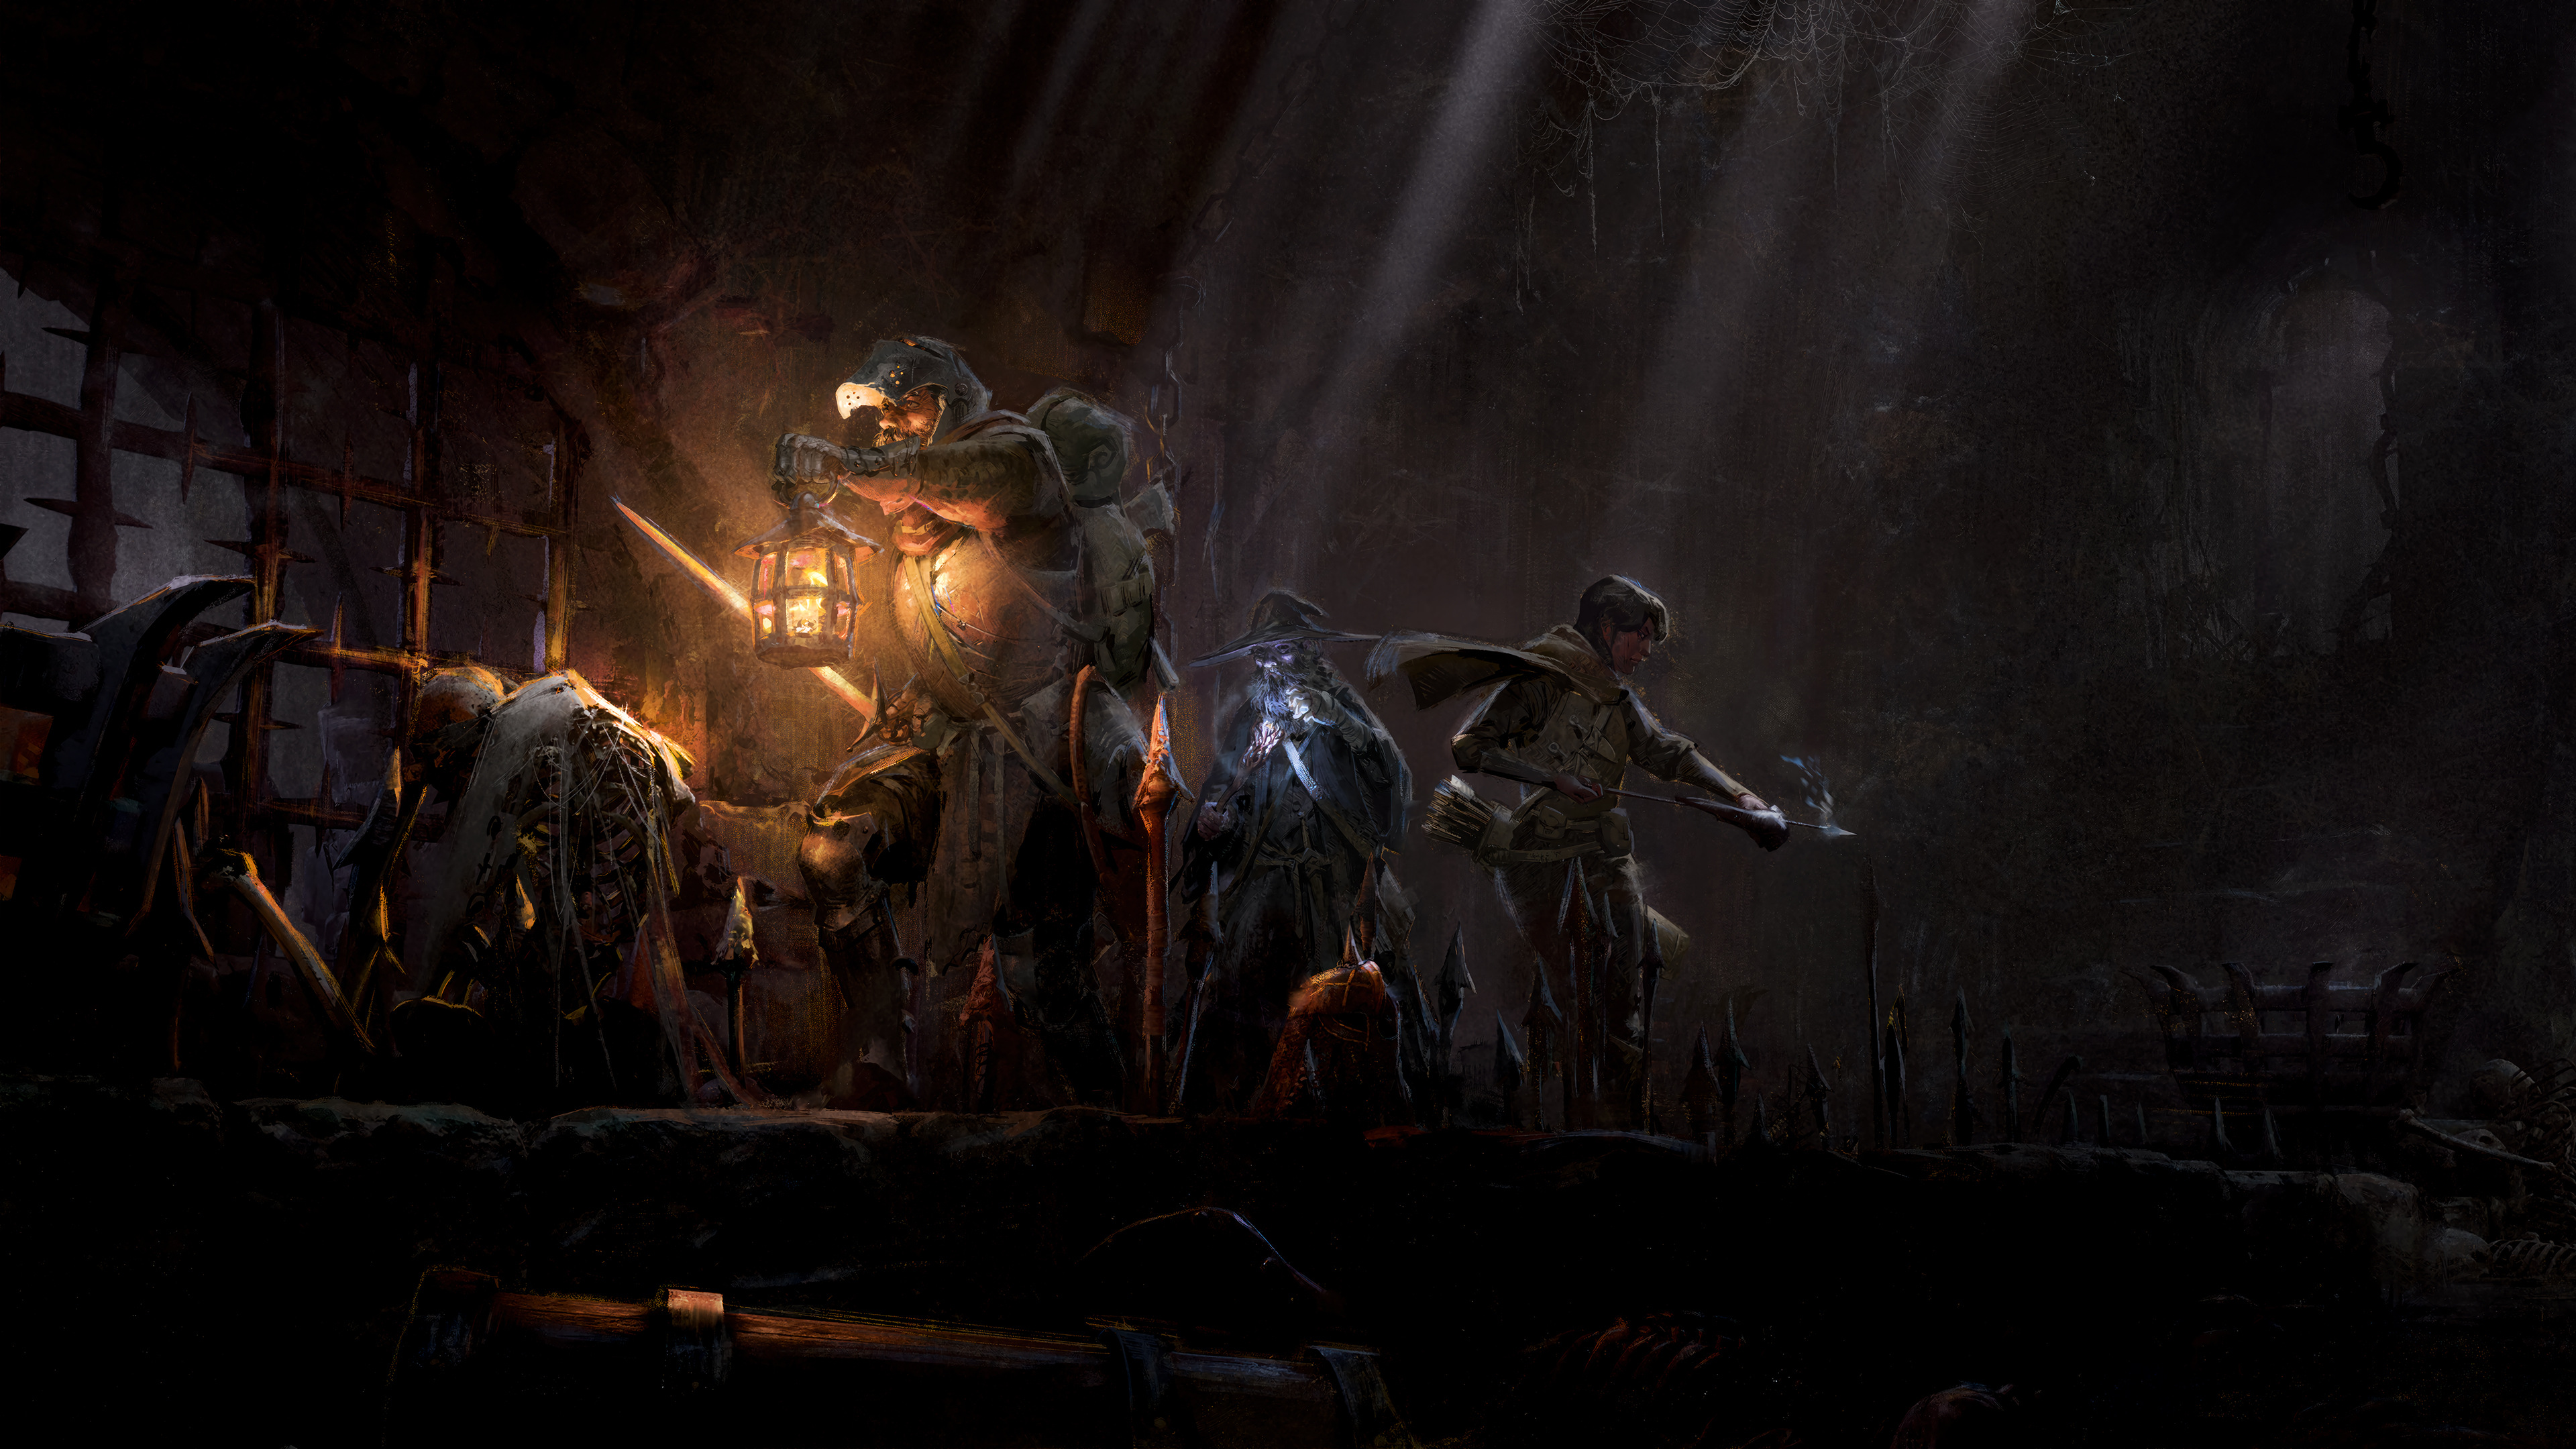 Alt-text: HD desktop wallpaper featuring a Dark and Darker game scene with characters exploring a dimly-lit, eerie underground environment.